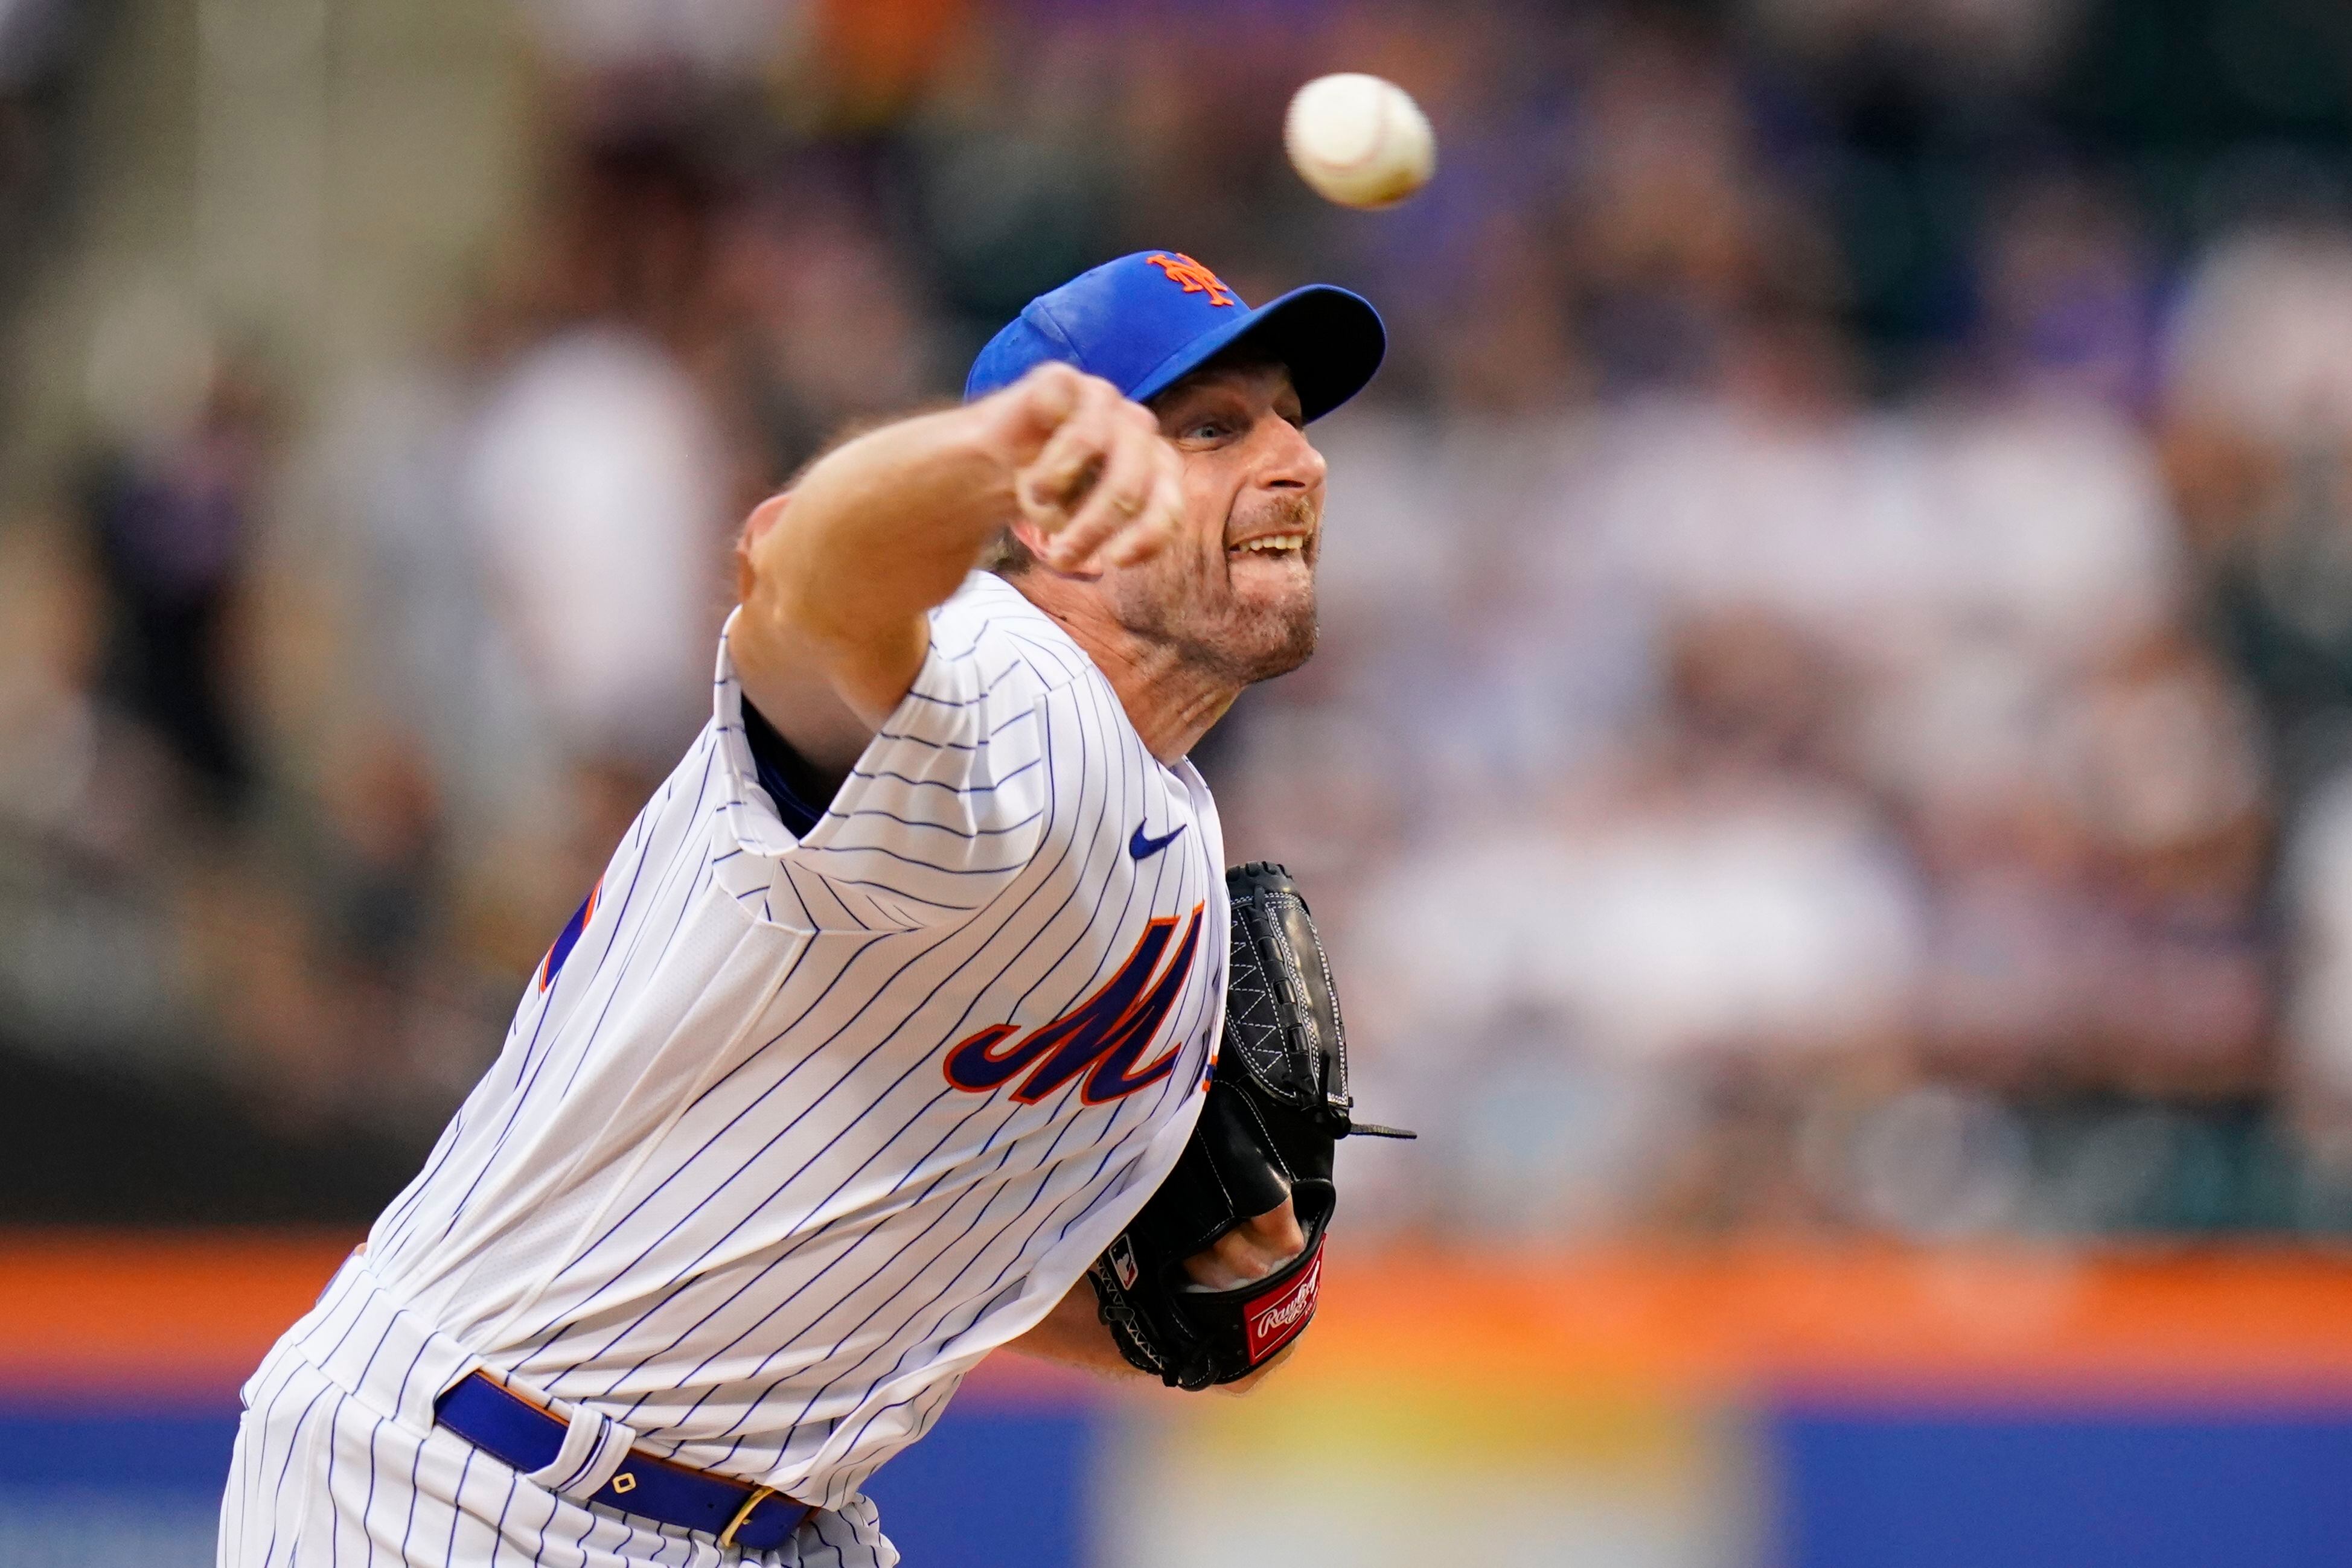 Mets edge Yankees 3-2 in 9th for 2-game Subway Series sweep